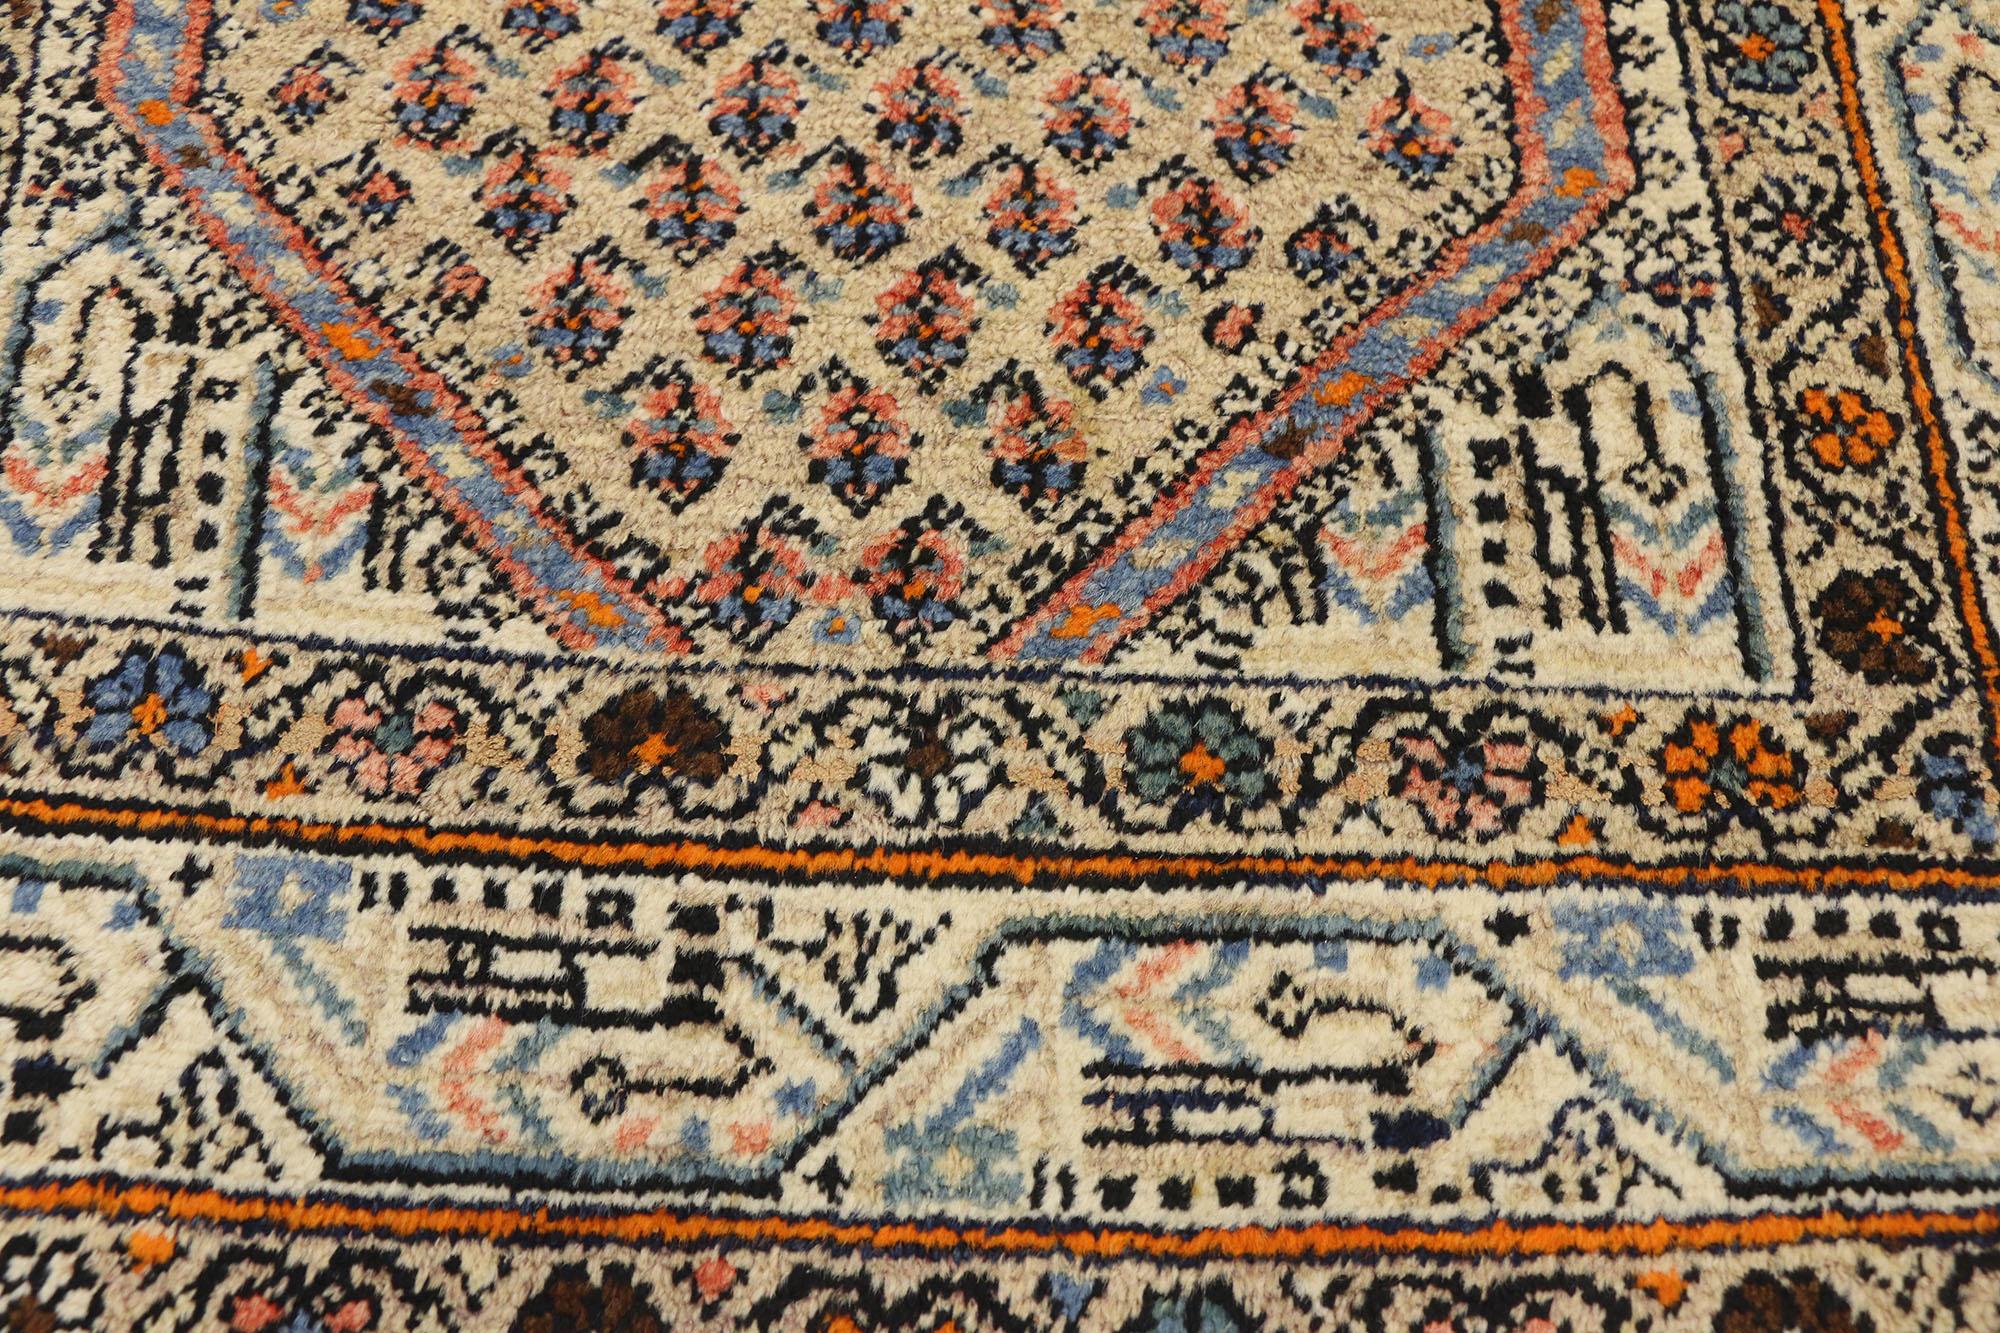 Modern Antique Persian Saraband Rug with Mir Boteh Design For Sale